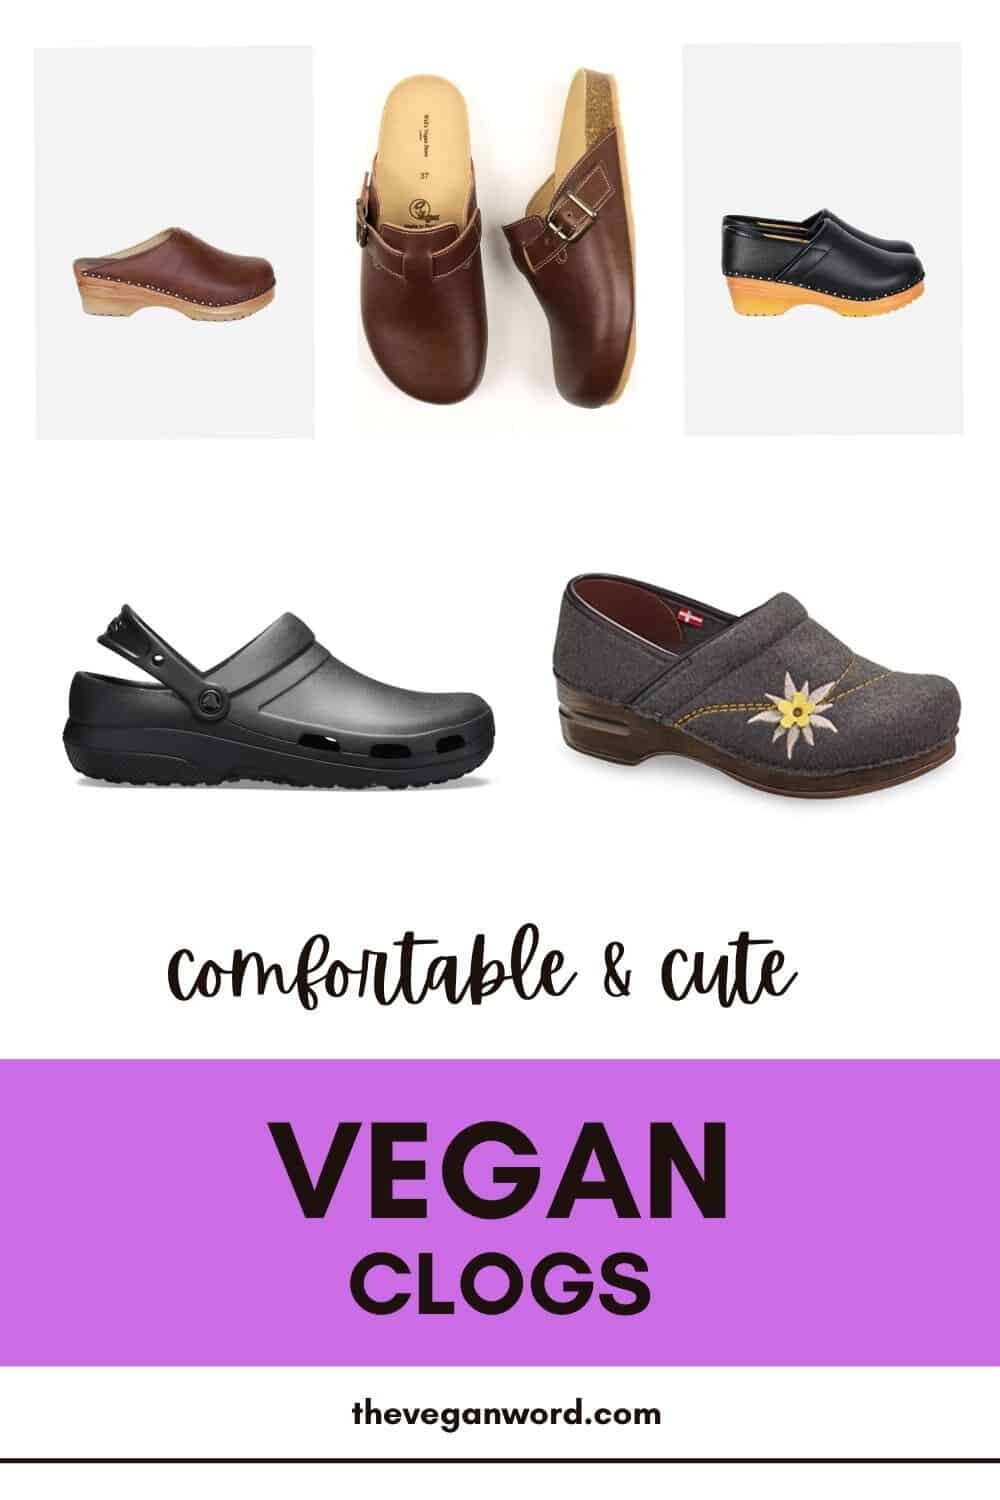 Pinterest image showing vegan clogs and text that reads "comfortable & cute vegan clogs"